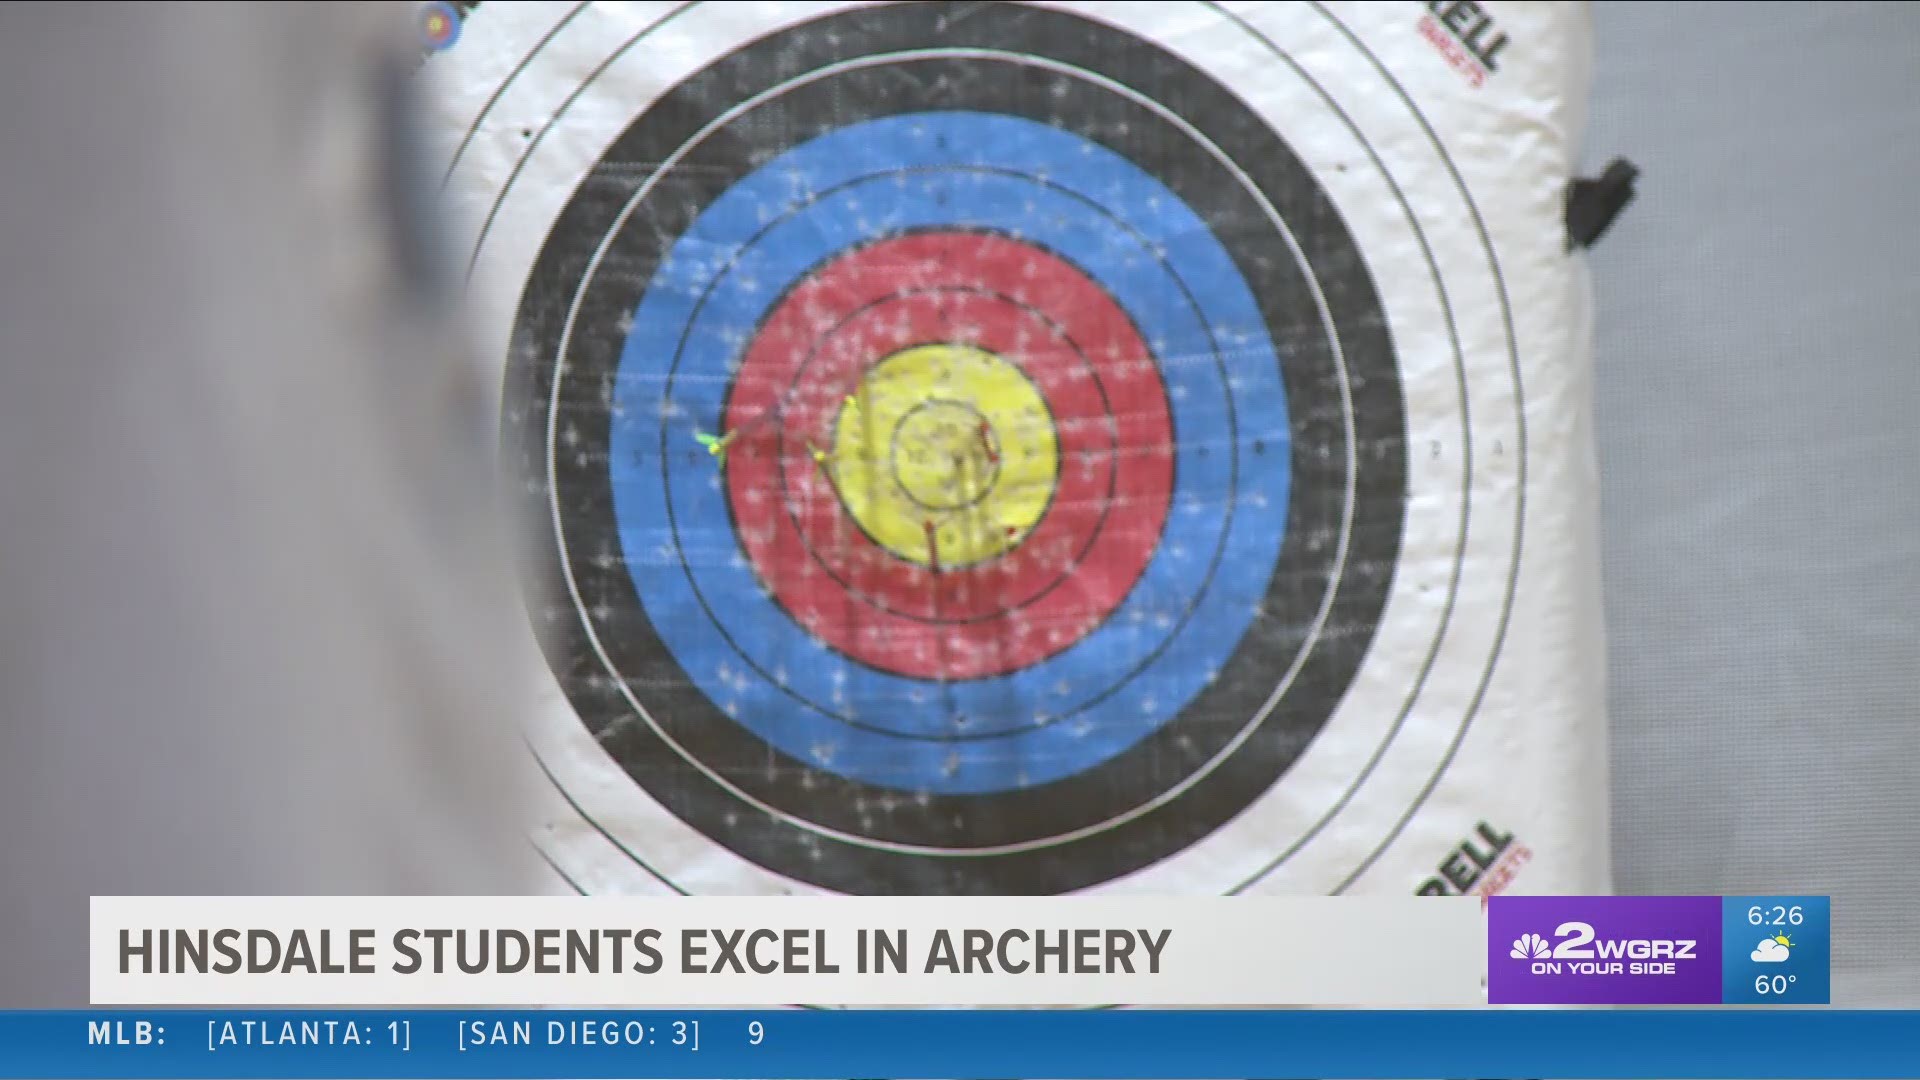 Hinsdale students excel in archery